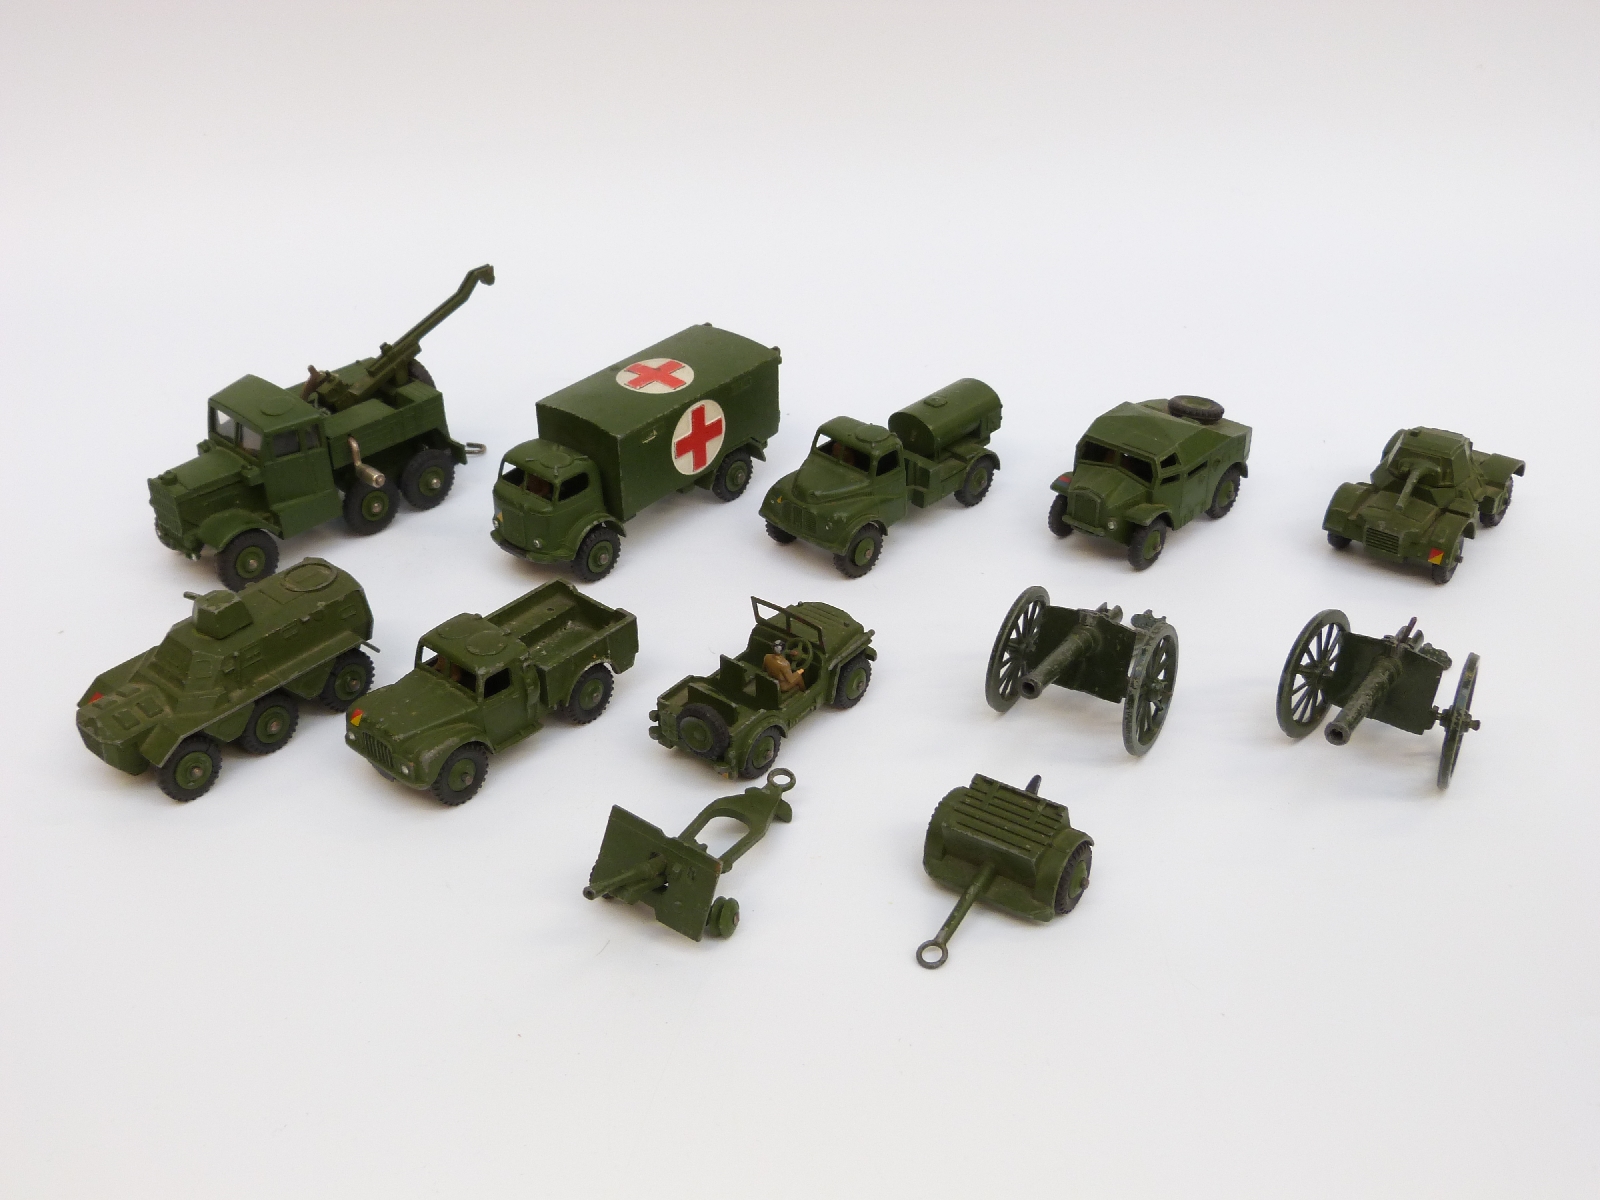 Ten Dinky Toys and Supertoys diecast model military vehicles including Military Ambulance, - Image 2 of 9